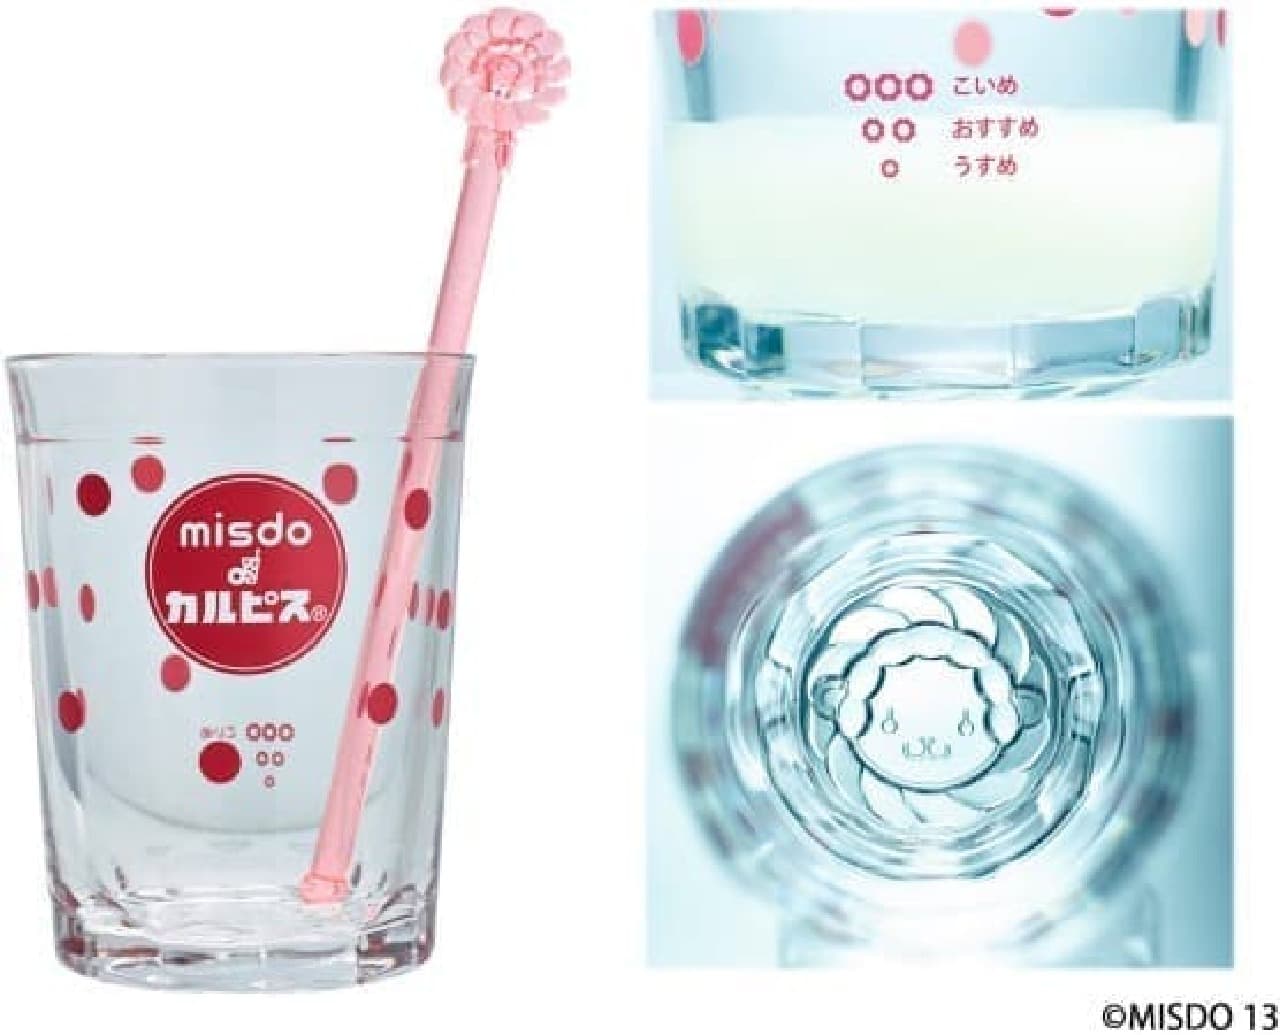 Collaboration between Mister Donut and Calpis!